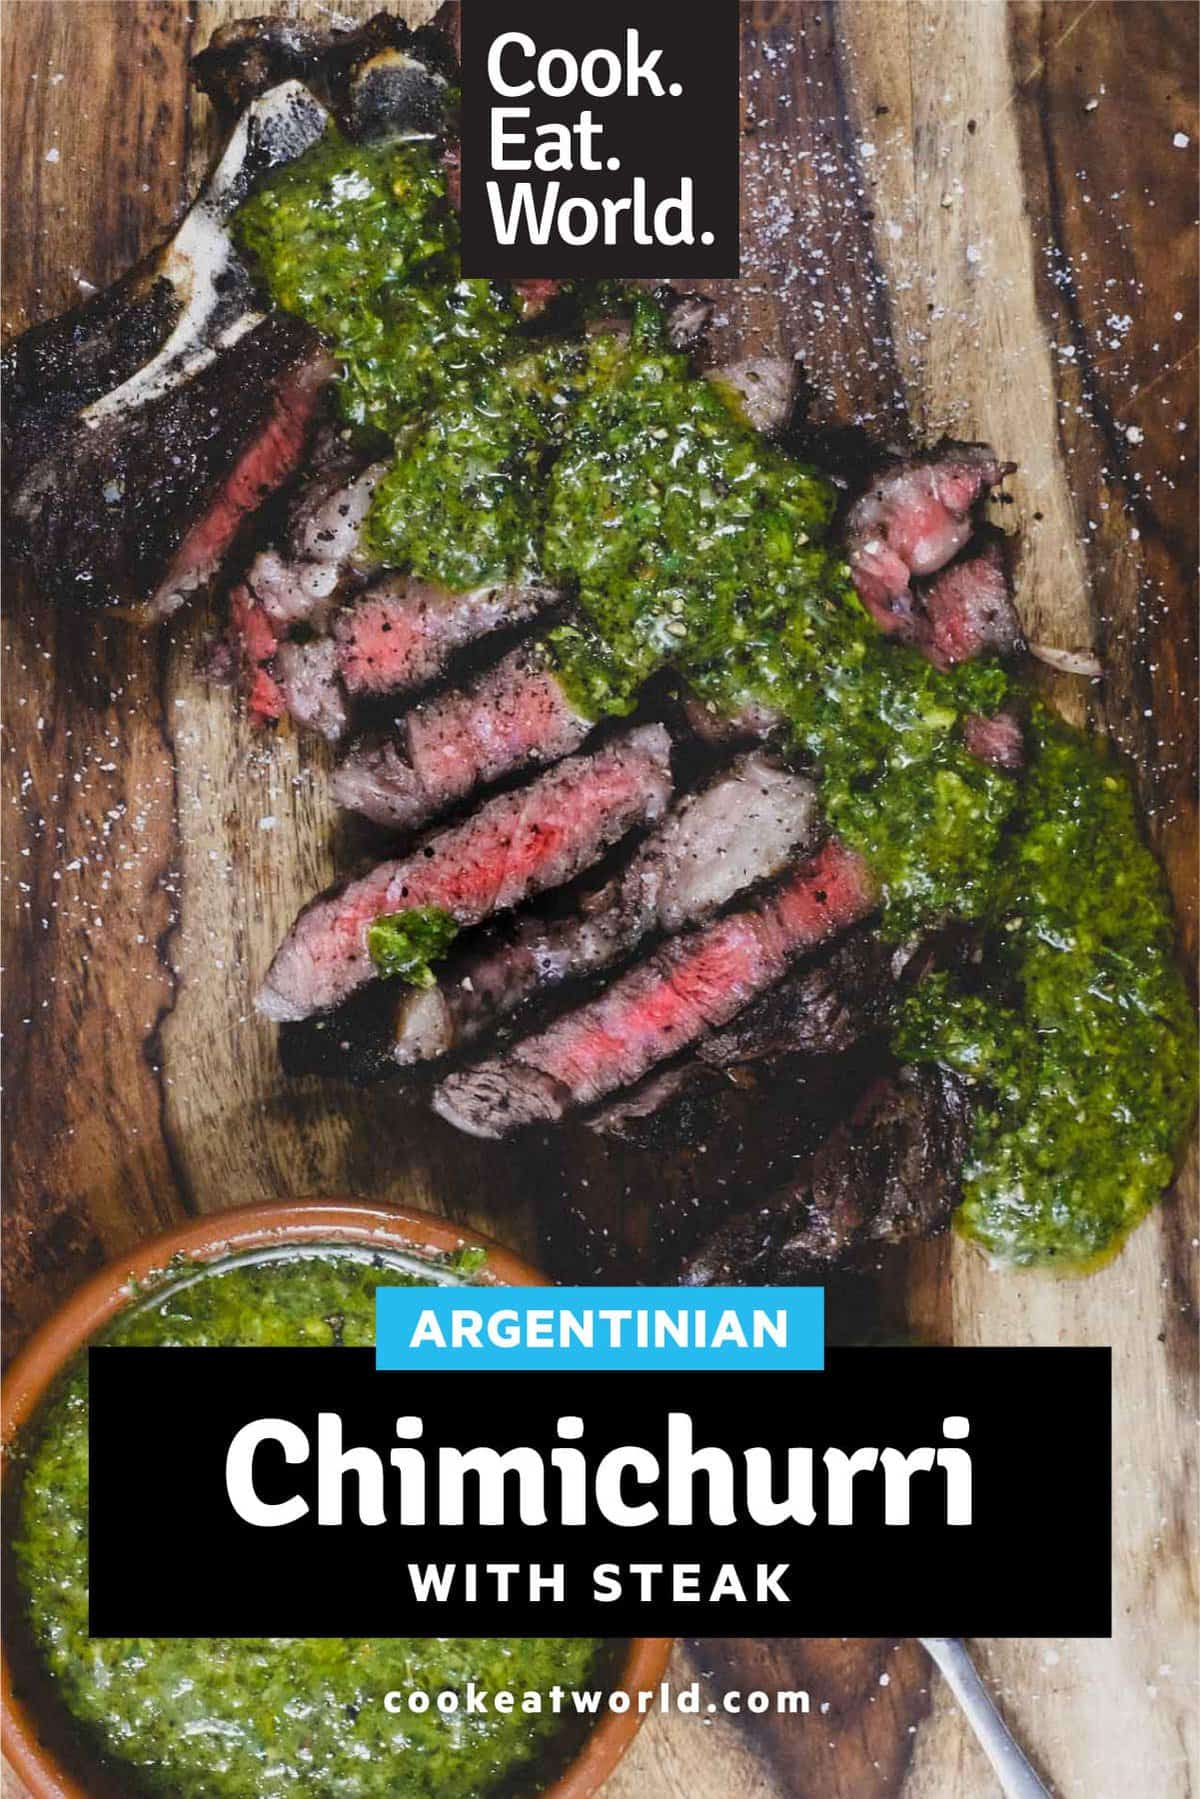 A wooden board with Argentinian Chimichurri Sauce and Steak